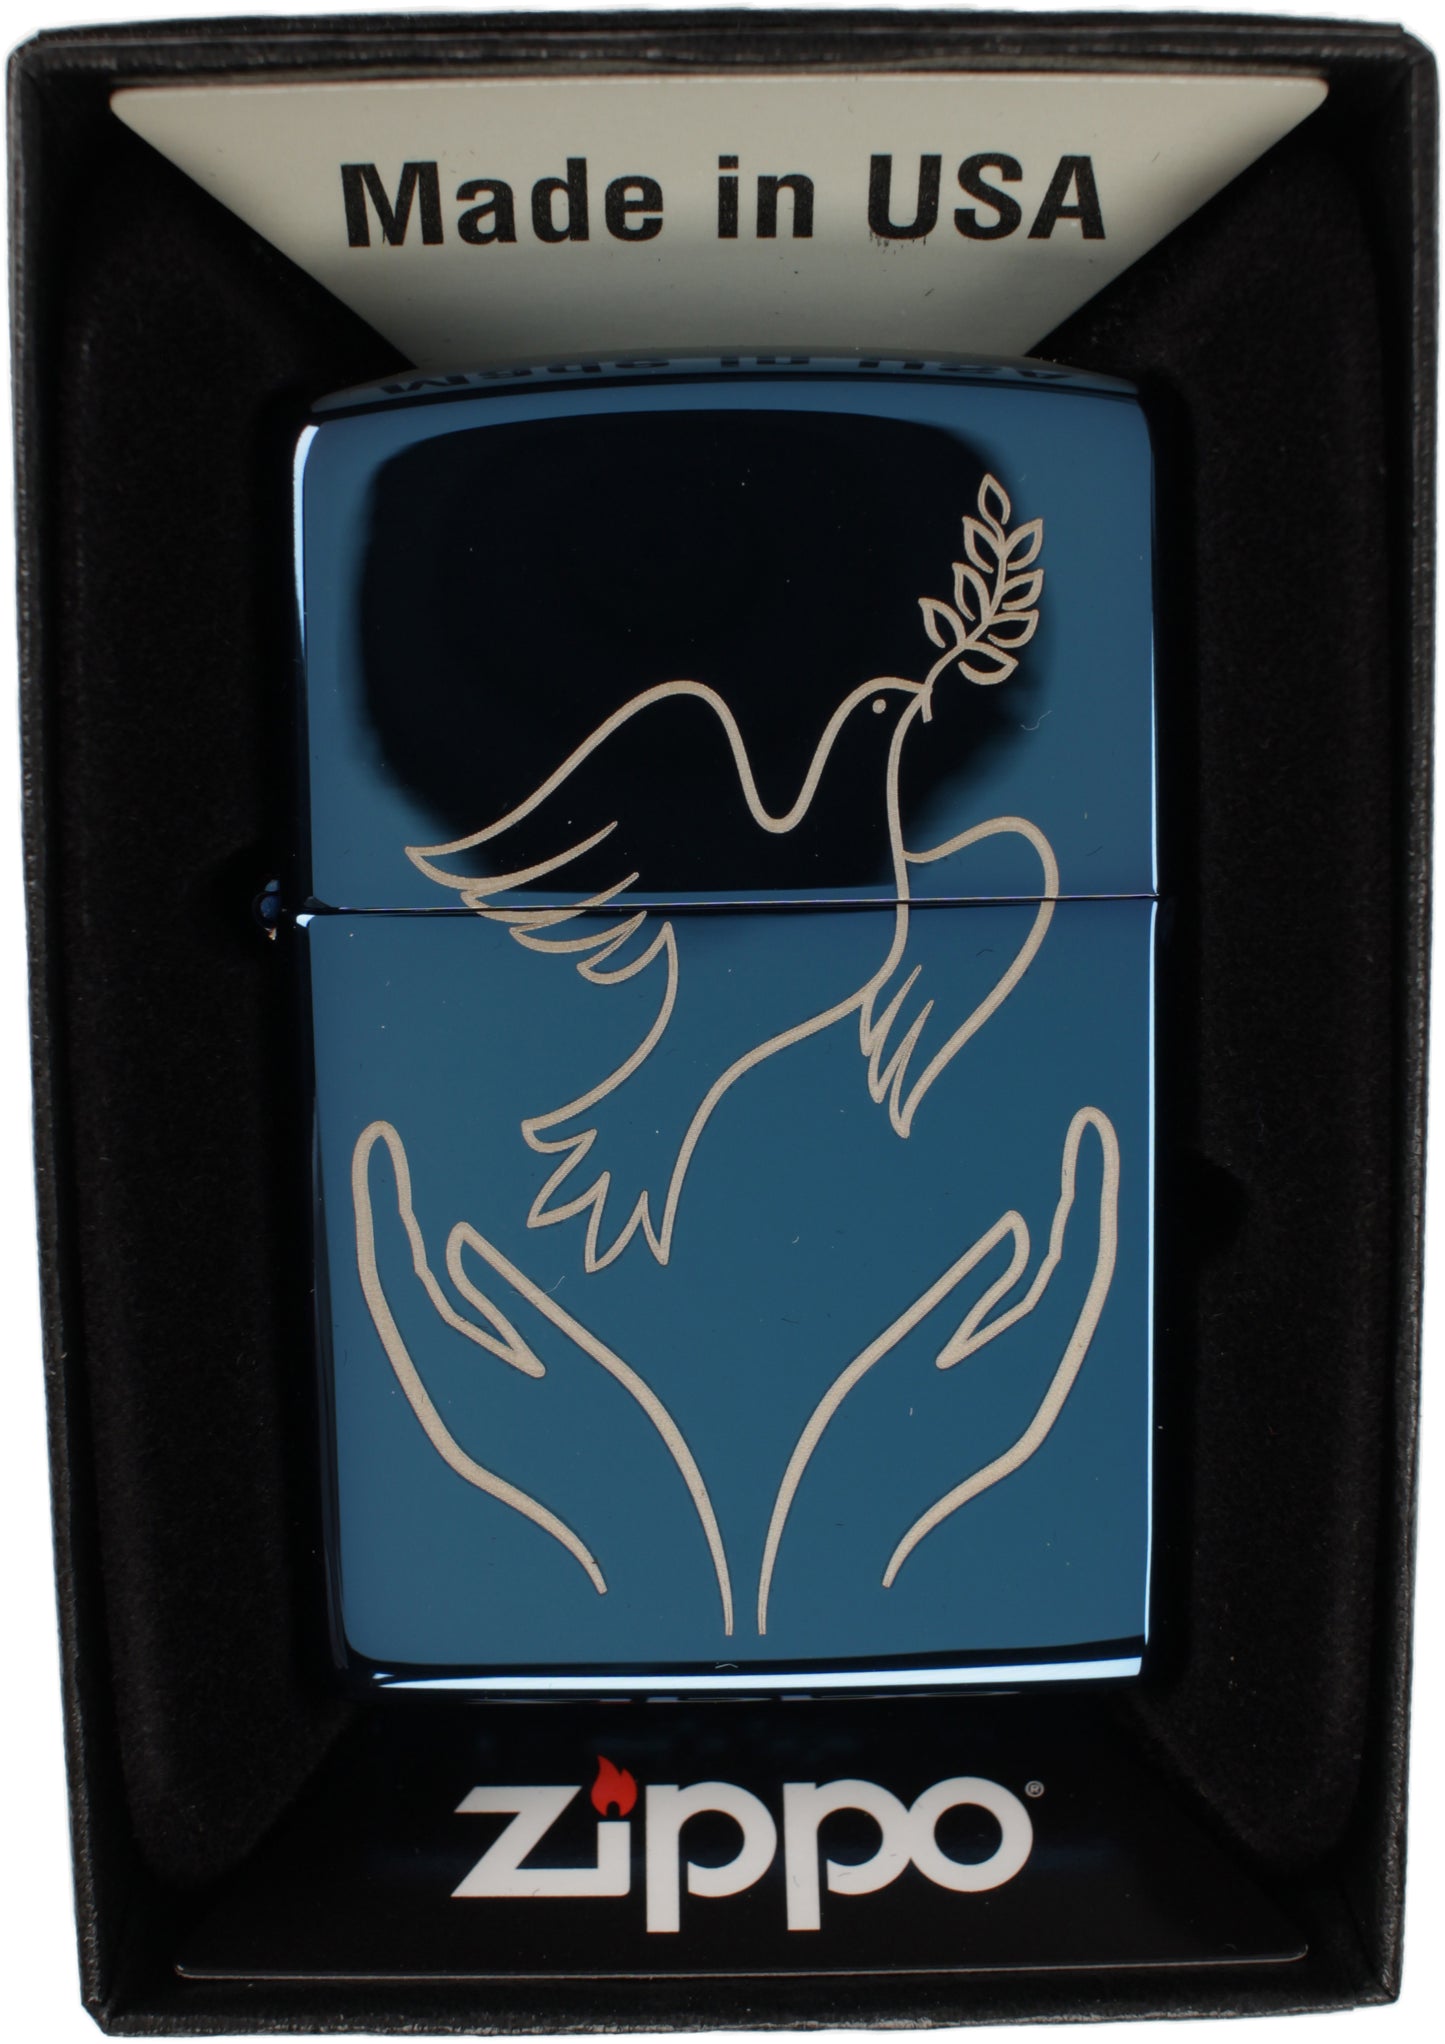 Dove with Olive Branch Released by Hands - Engraved High Polish Blue/Sapphire Zippo Lighter